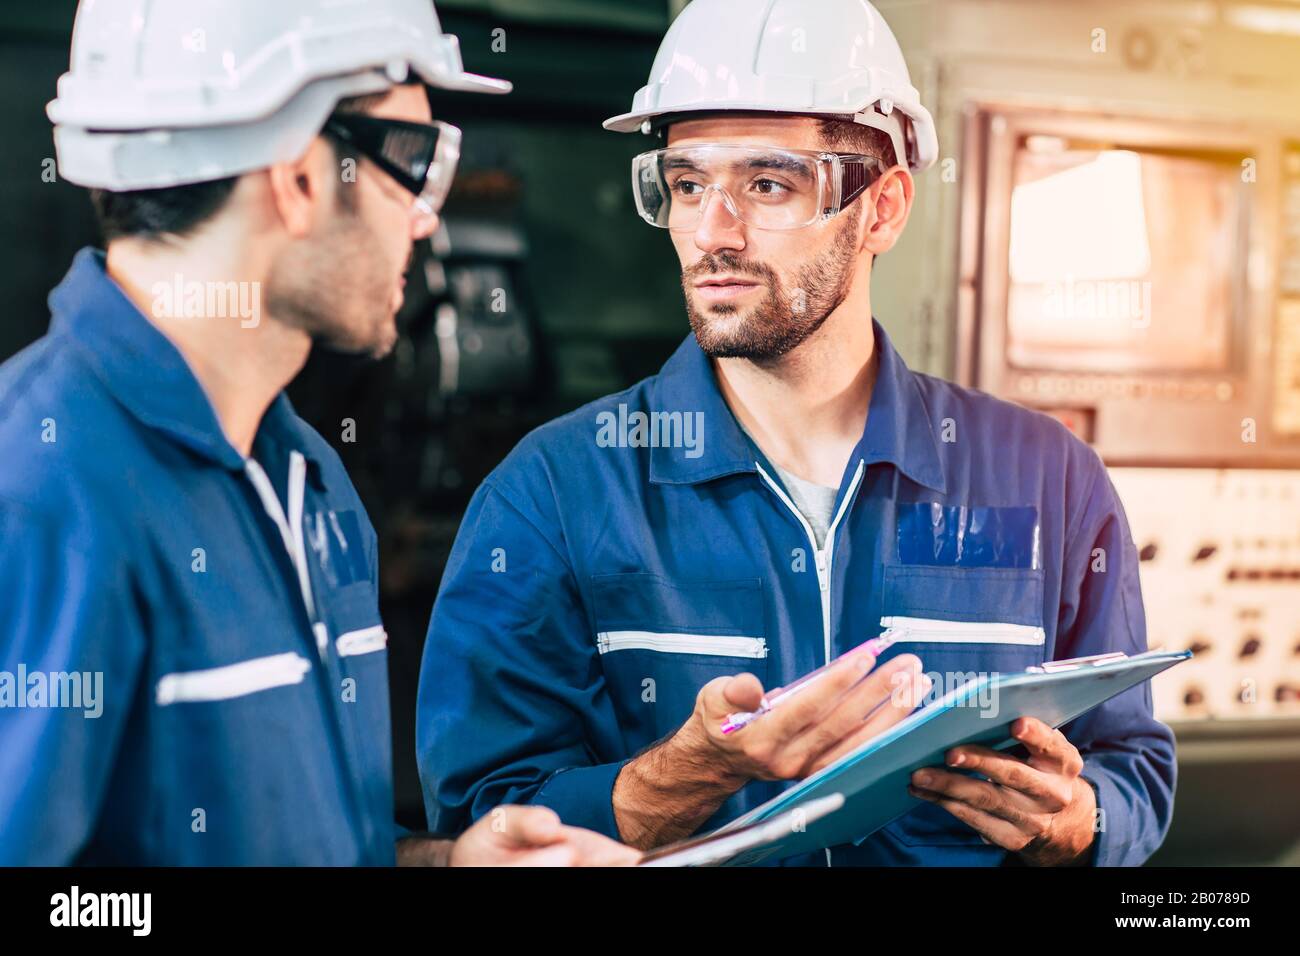 Engineer teamwork cooperate with worker to checking factory machine for safety and talking together. Stock Photo